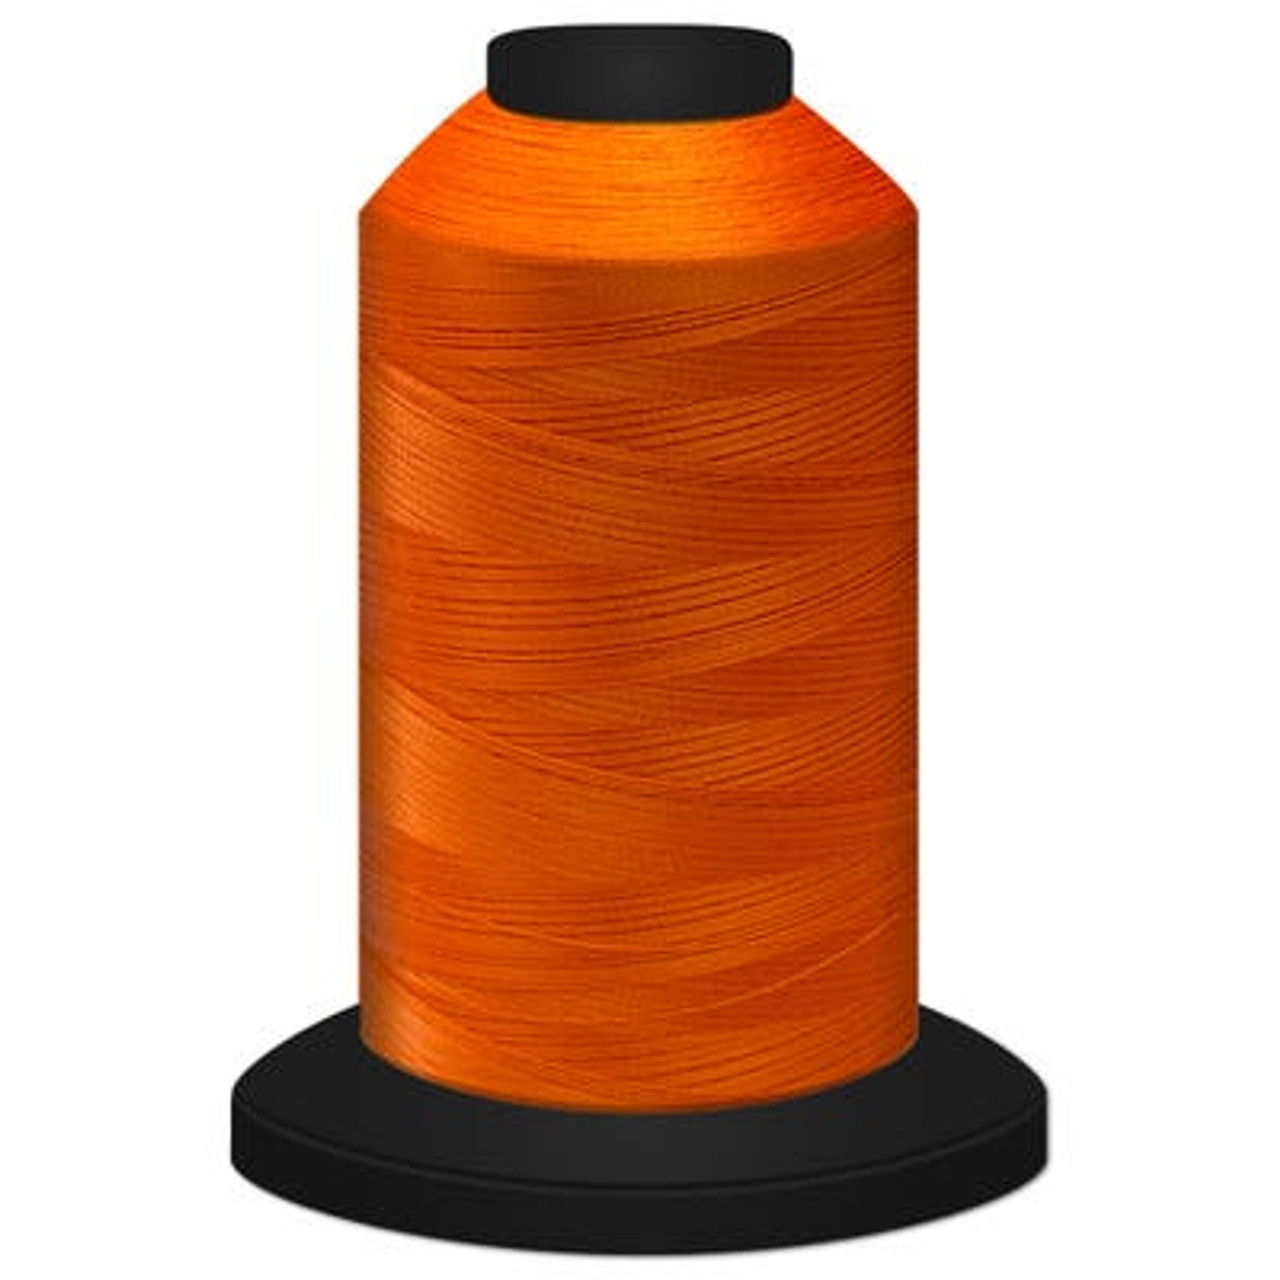 Lava - Filament Polyester - 60wt - Glide
This thread is a great choice for embroidering small letters, micro-stippling and fine detail quilting.  Made from colorfast polyester.
Glide runs virtually lint free through your machine’s tensioners and needle.
60wt - 5500 yds
Available in 20 colors.